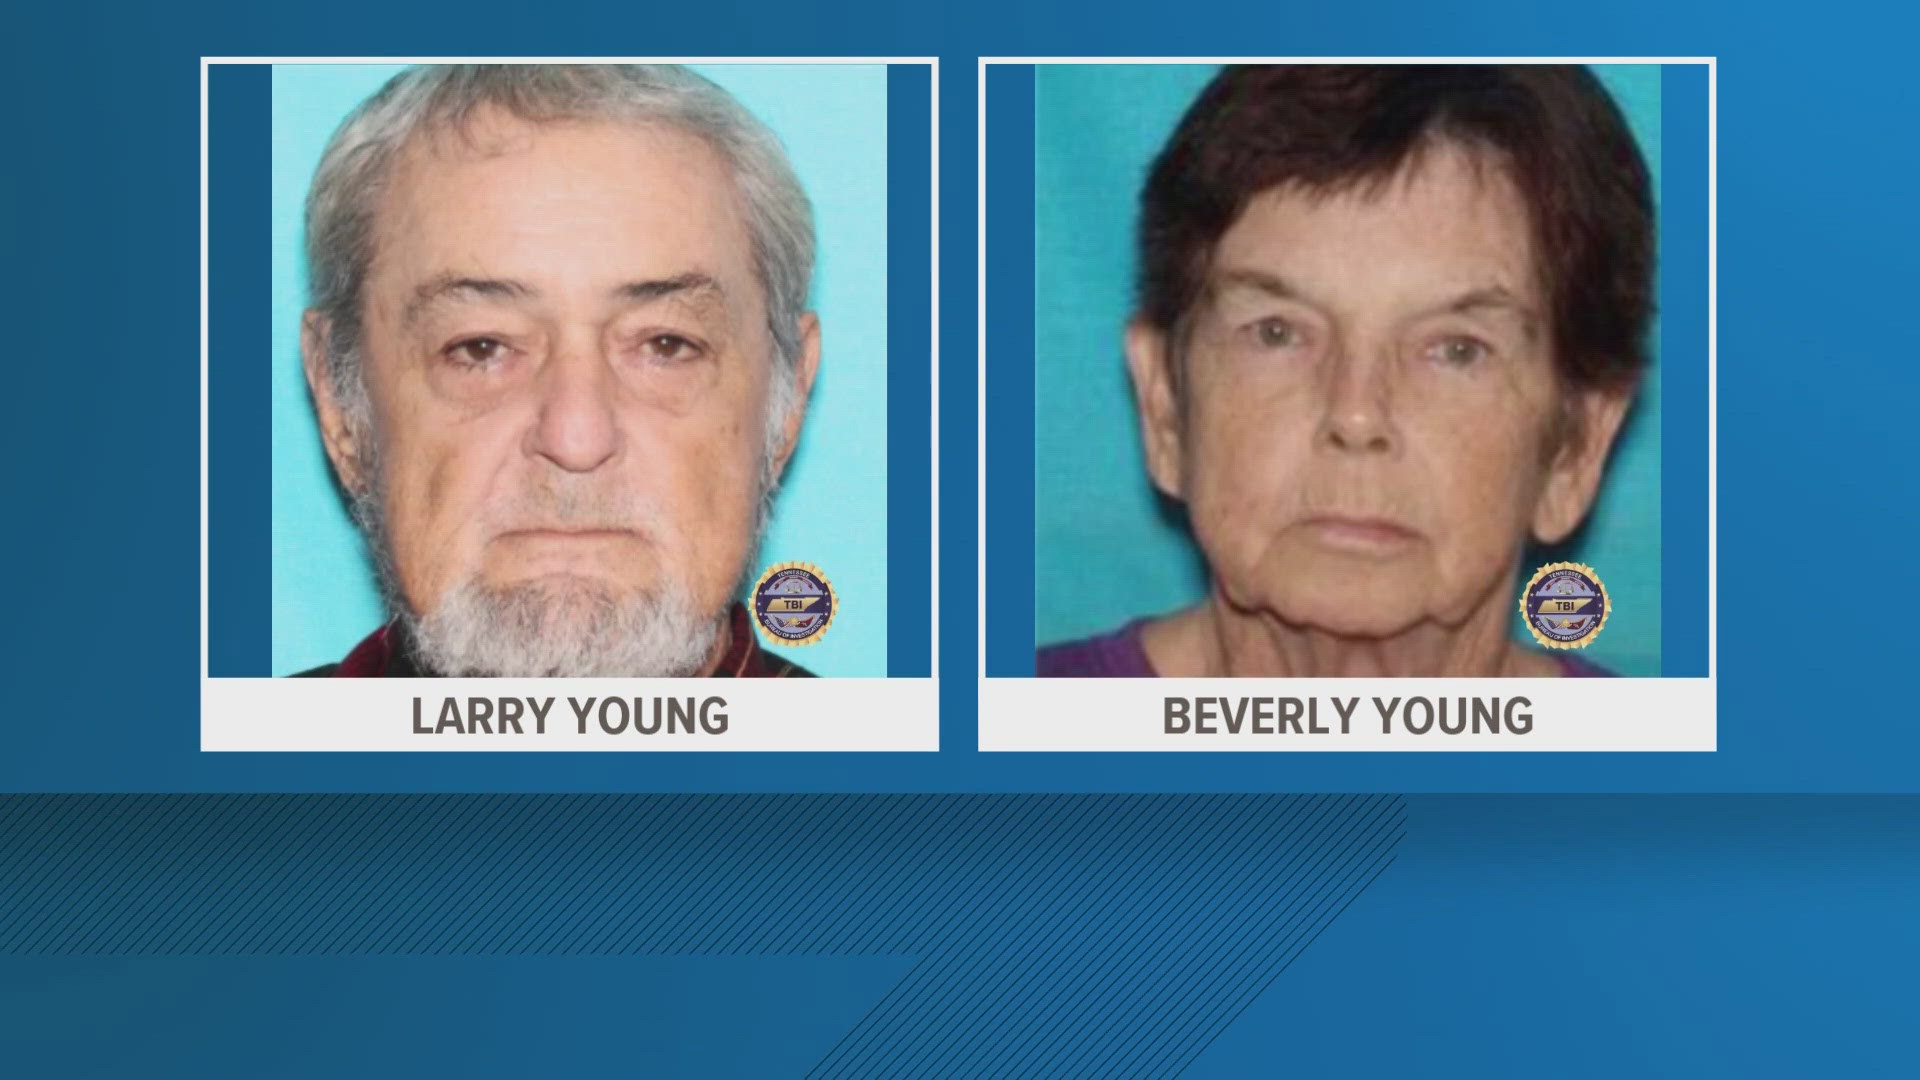 The TBI initially issued a Silver Alert for the couple when they were last seen at Brimstone Recreation ATV Park on June 29.